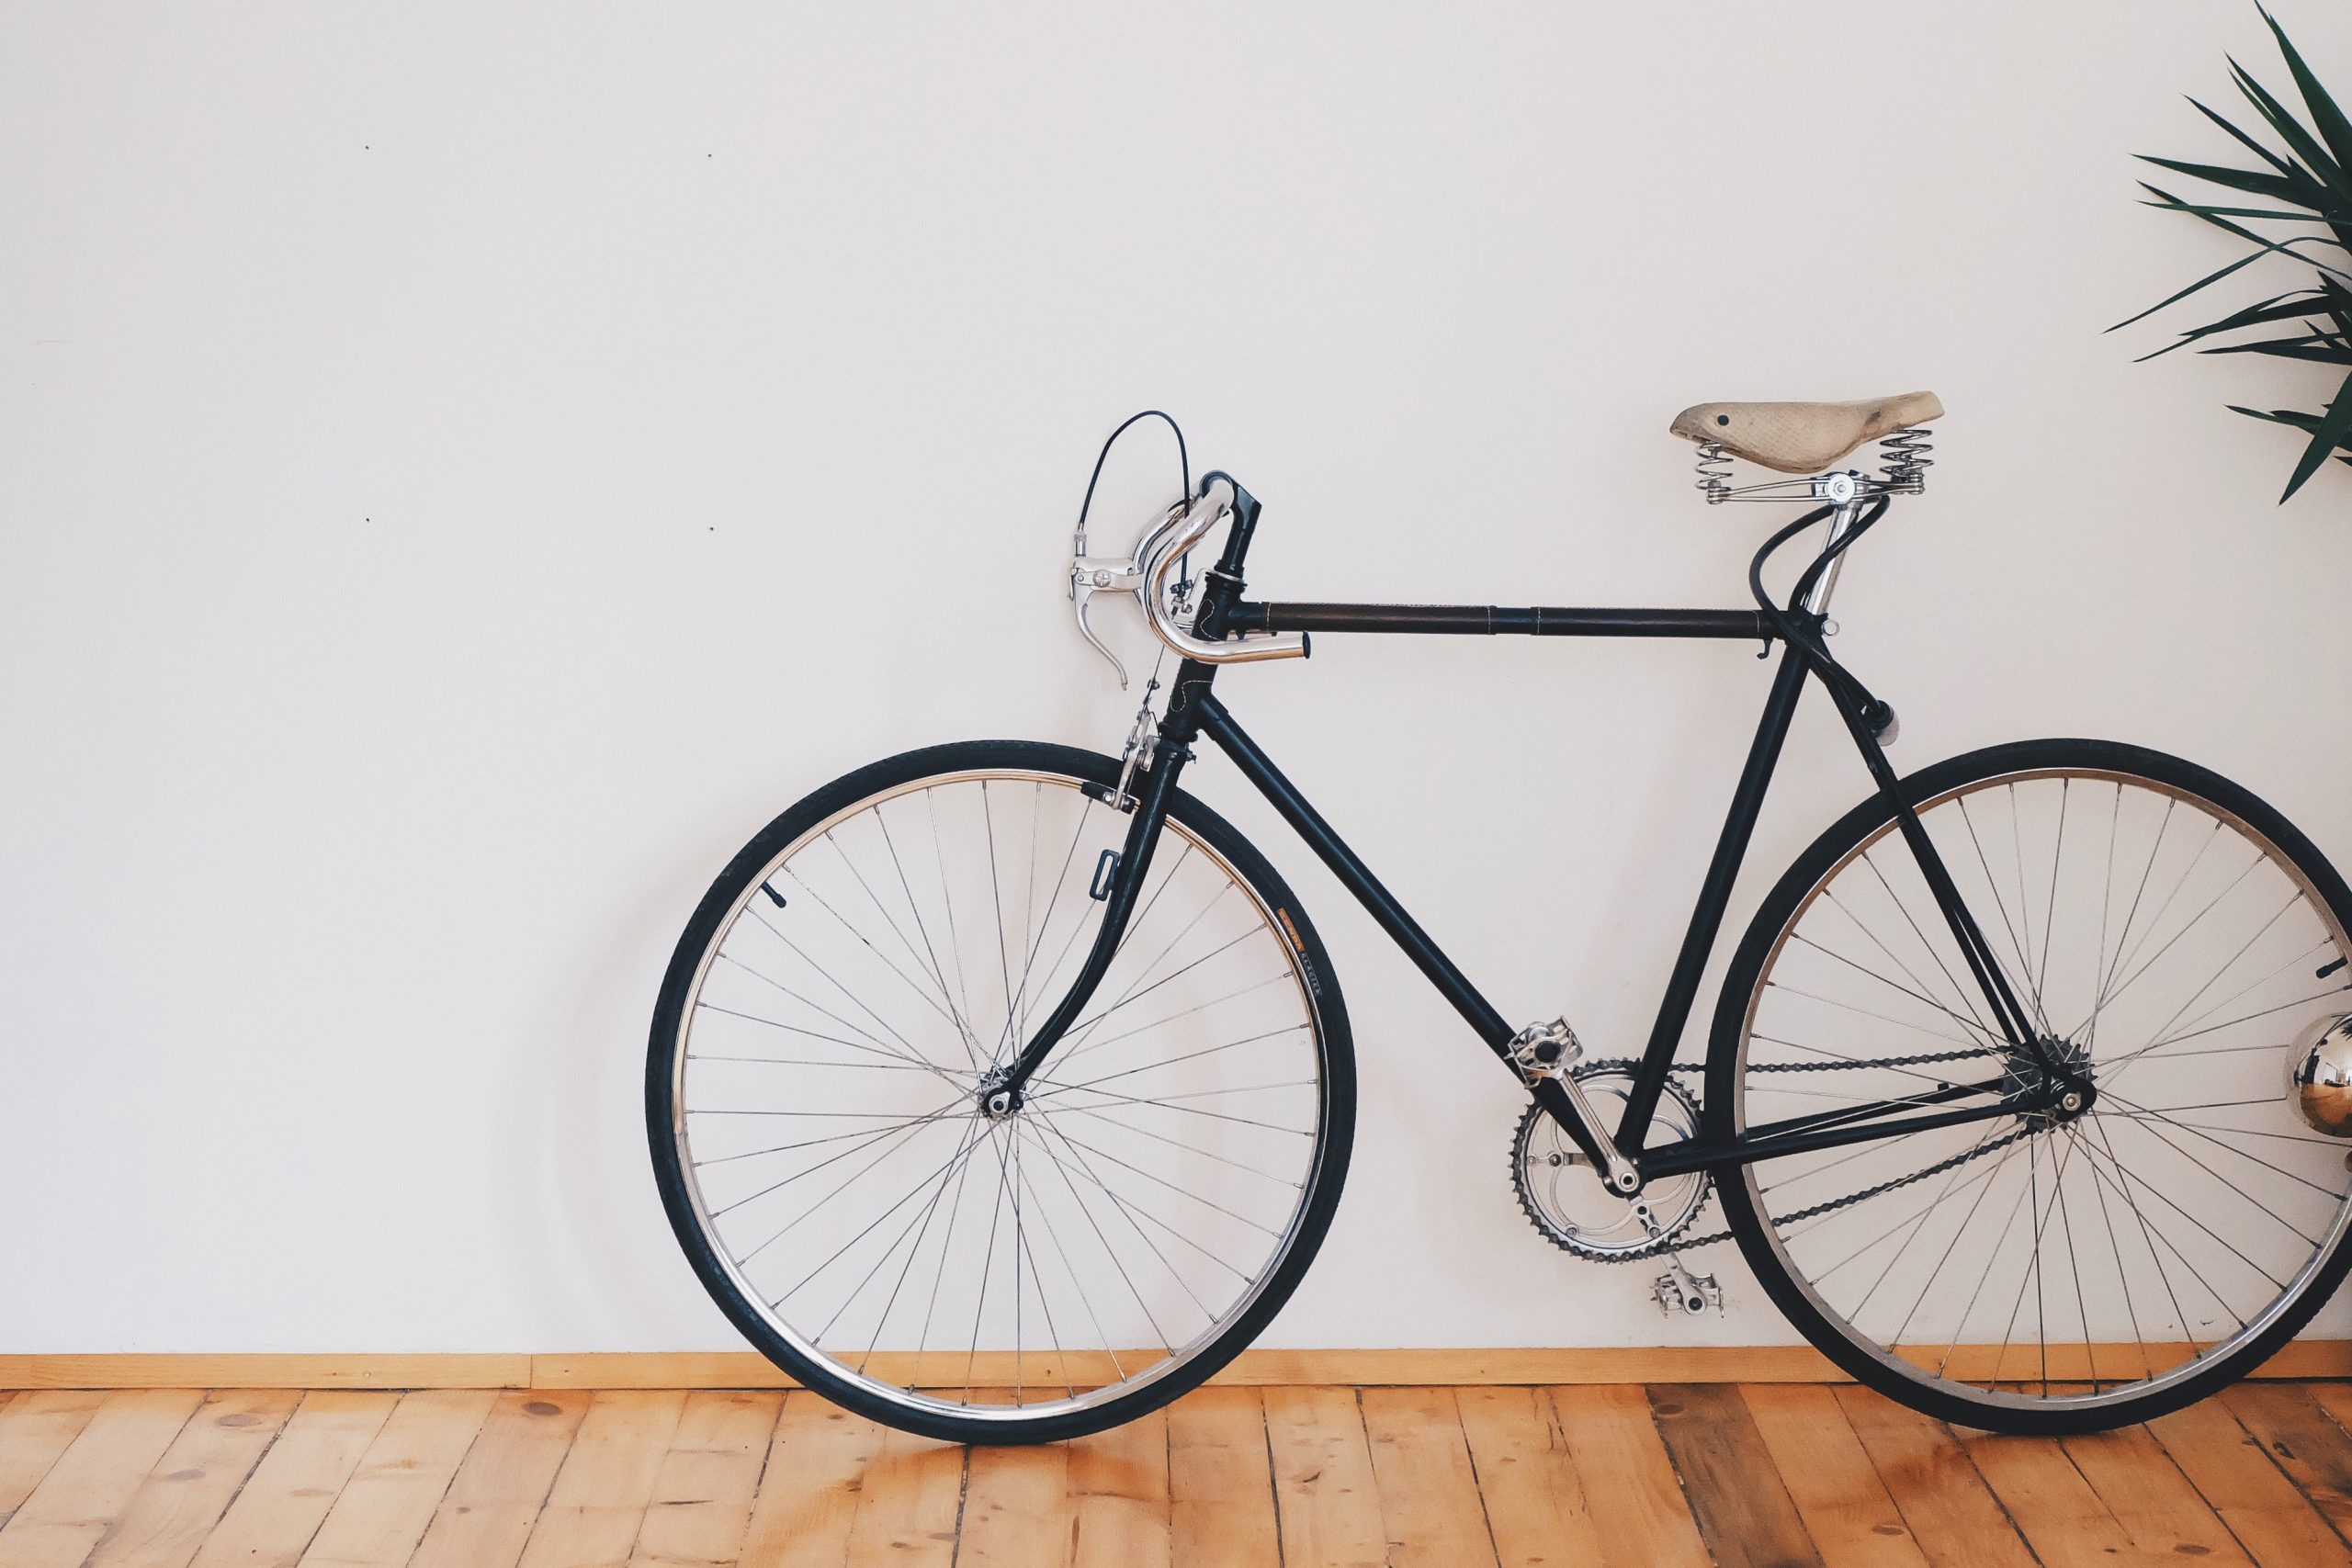 A bicycle leaning against a white wall of a room.